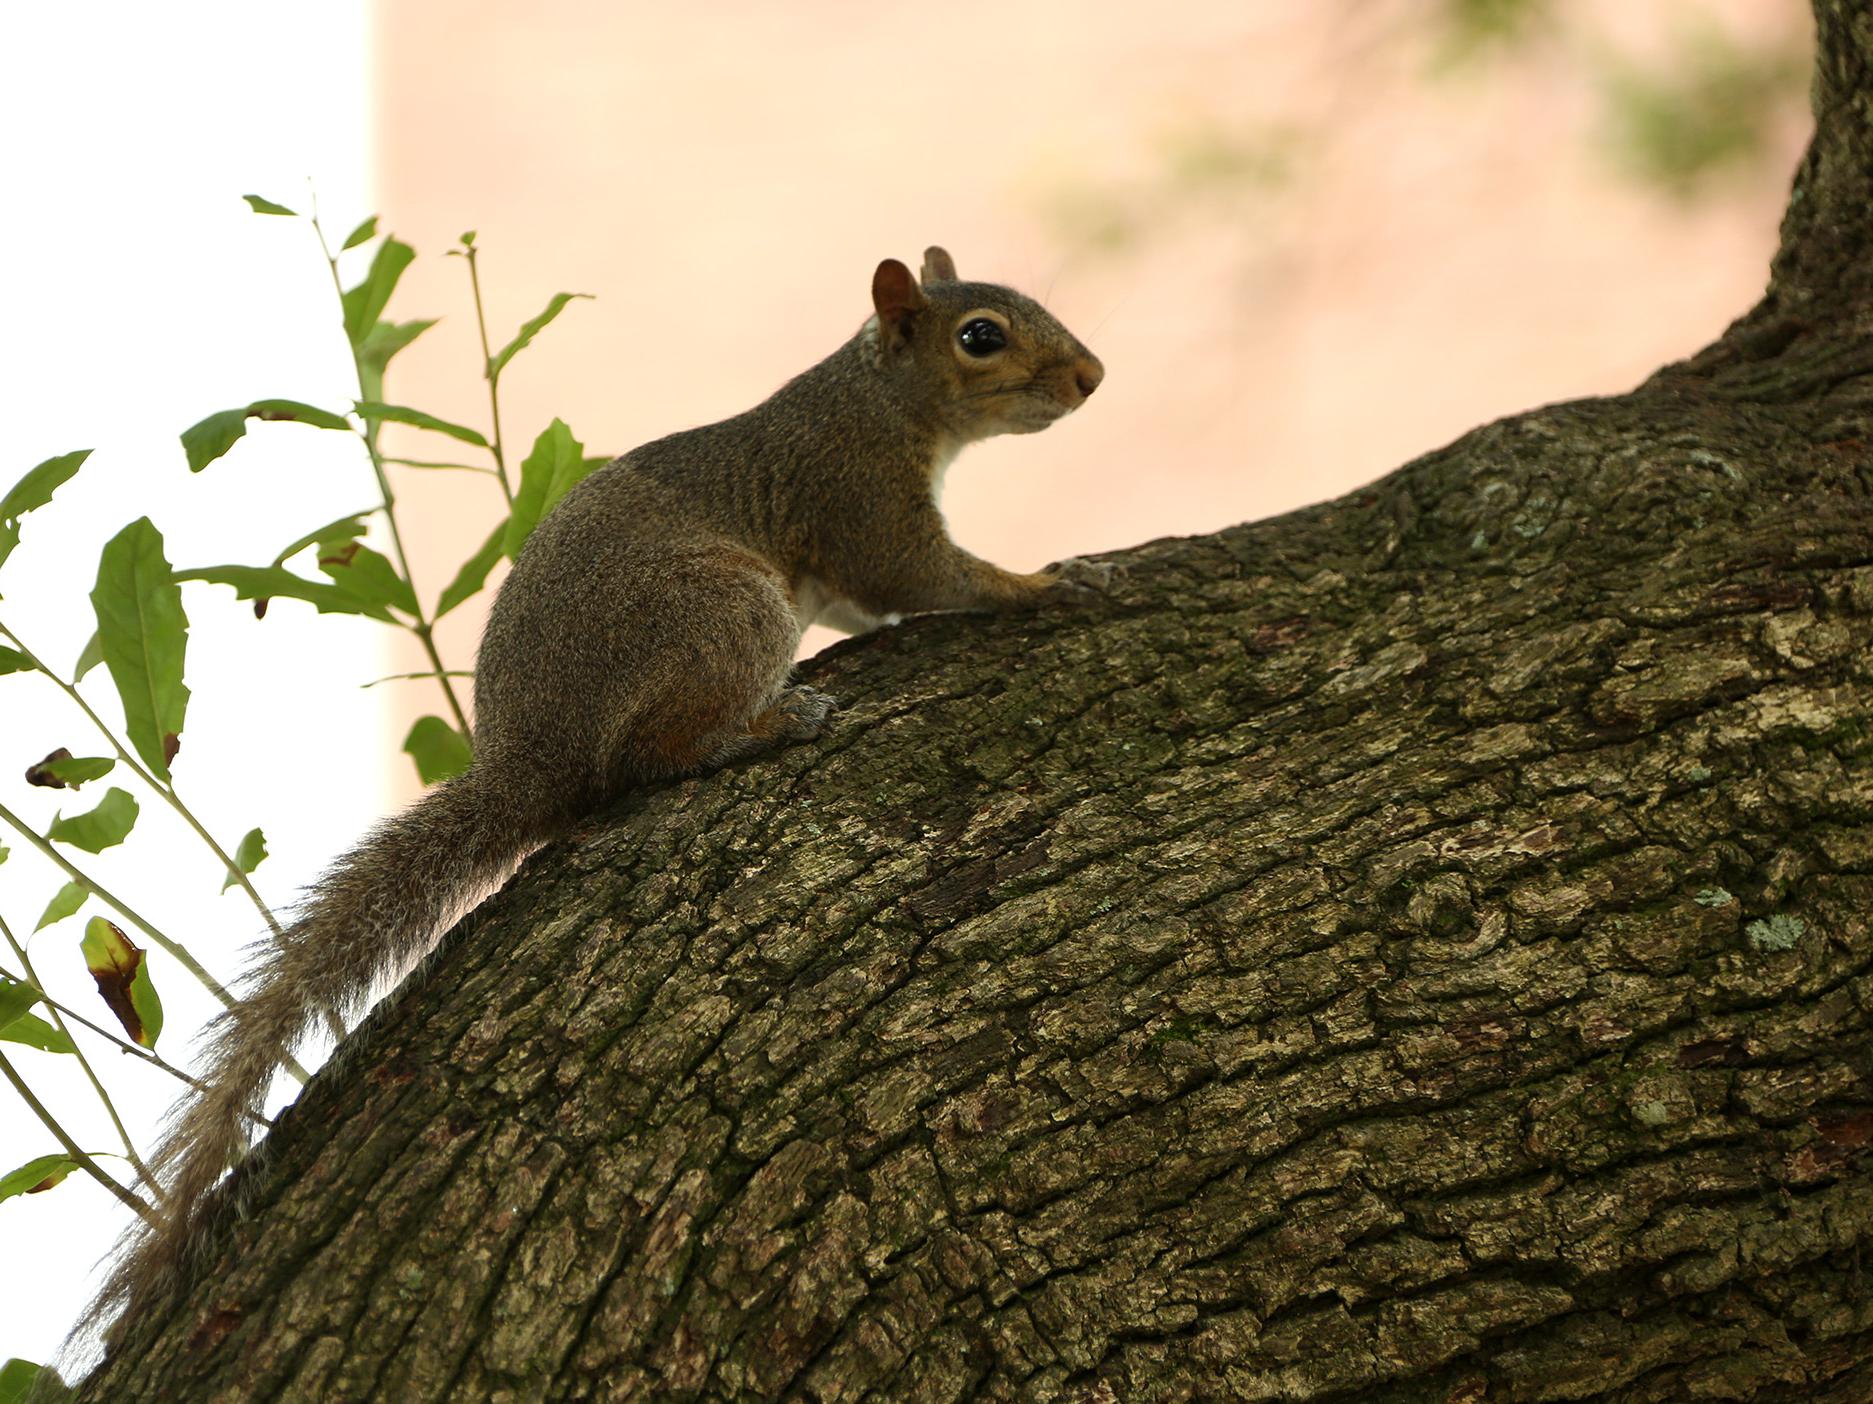 A gray squirrel pauses as it climbs a tree.